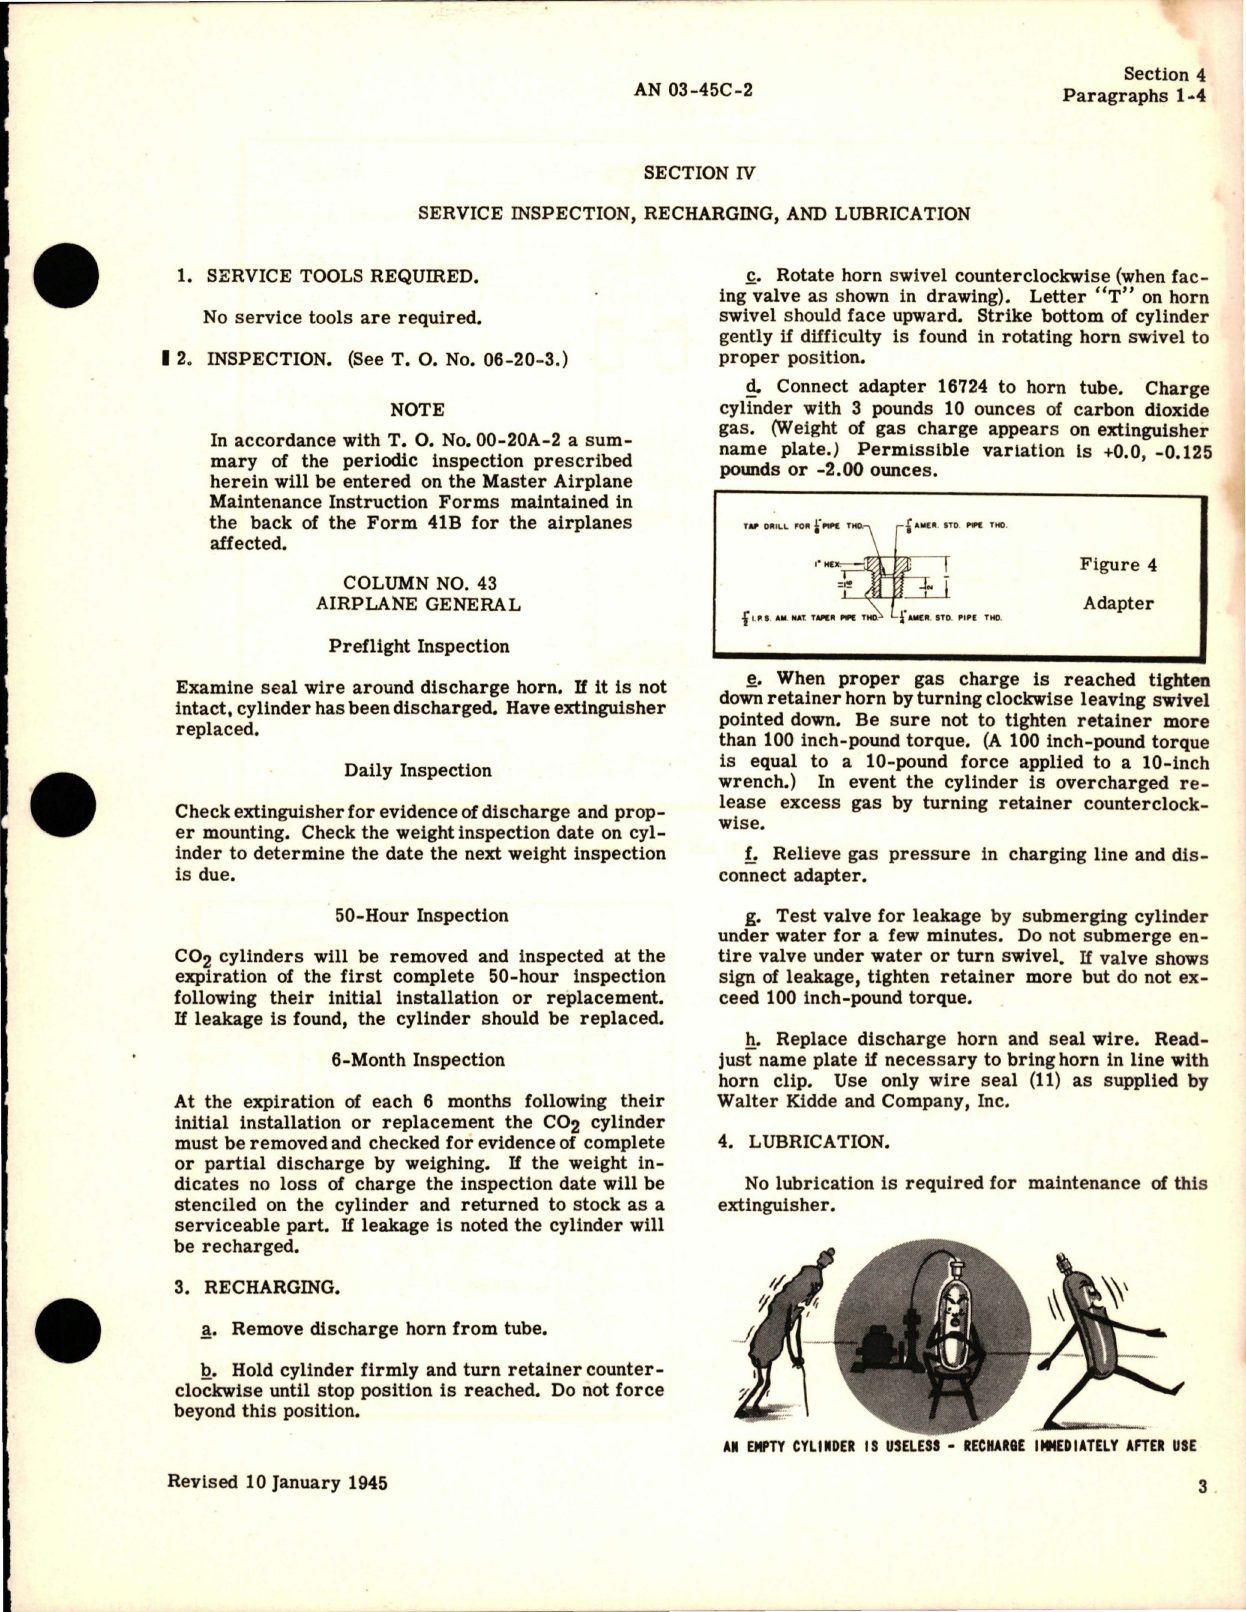 Sample page 7 from AirCorps Library document: Instructions with Parts Catalog for A-17 Portable Fire Extinguisher